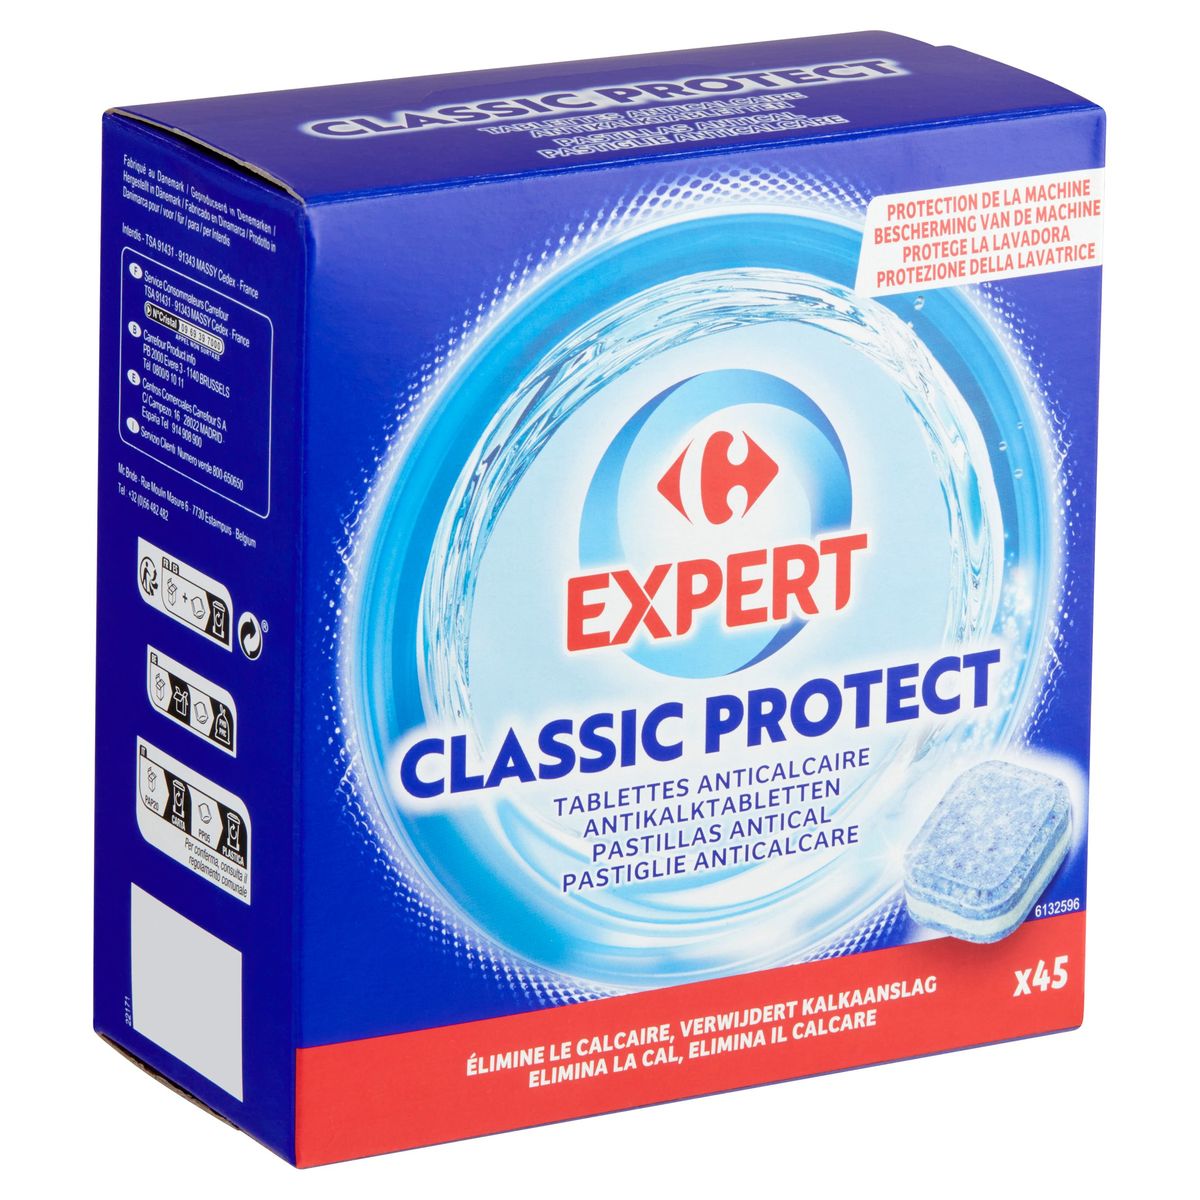 Carrefour Extra Classic Protect Tablettes Anticalcaire 45 x 12 g